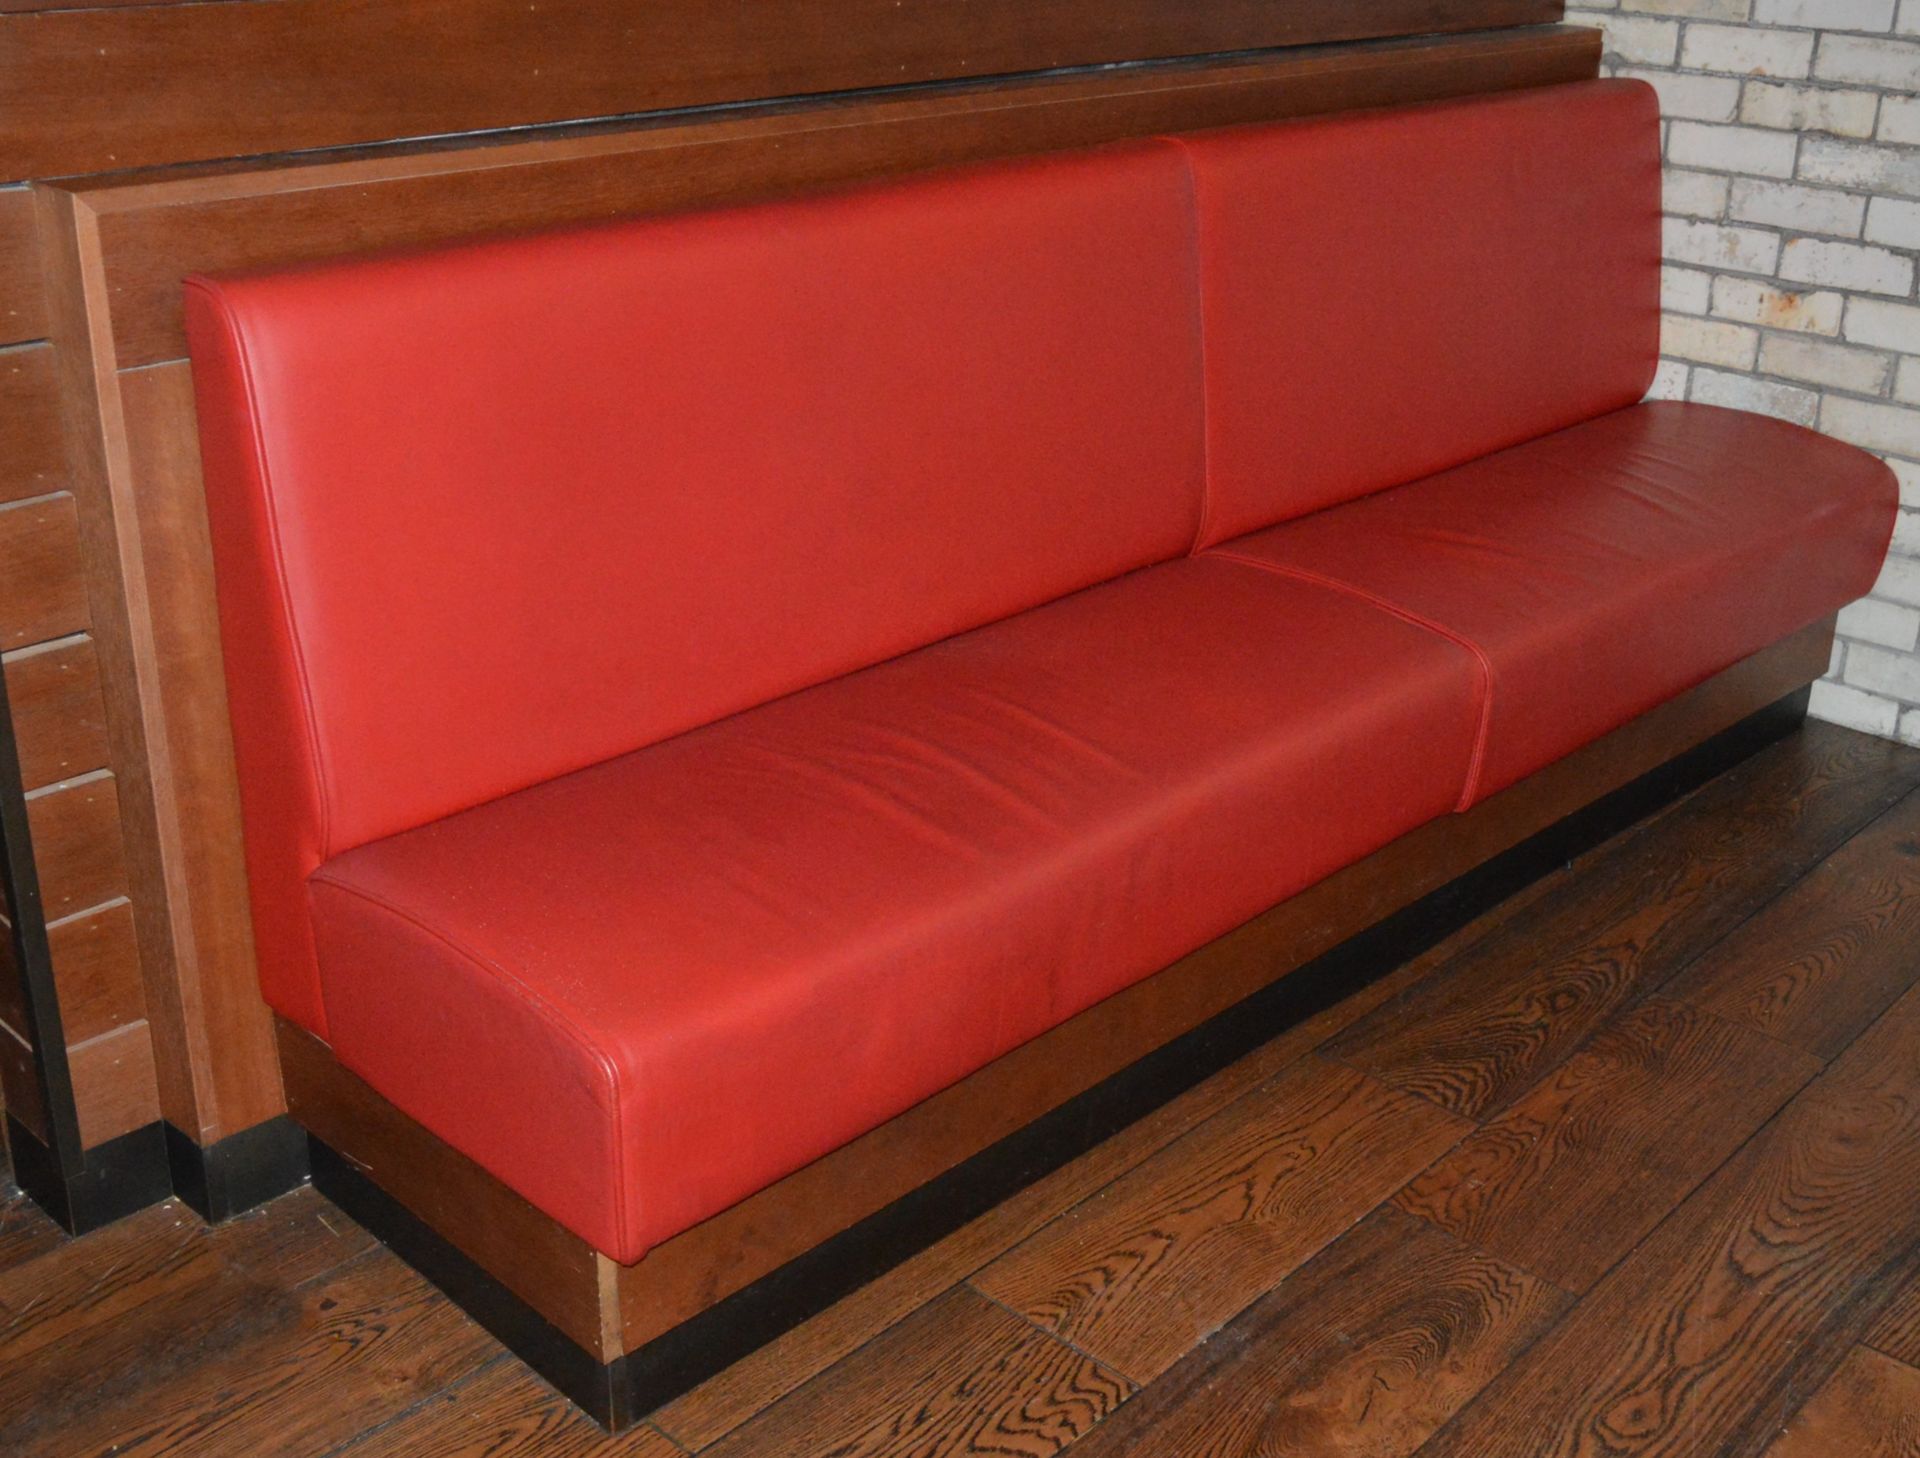 1 x High Back Seating Bench Upholstered in Red Leather With Oak Base and Surround